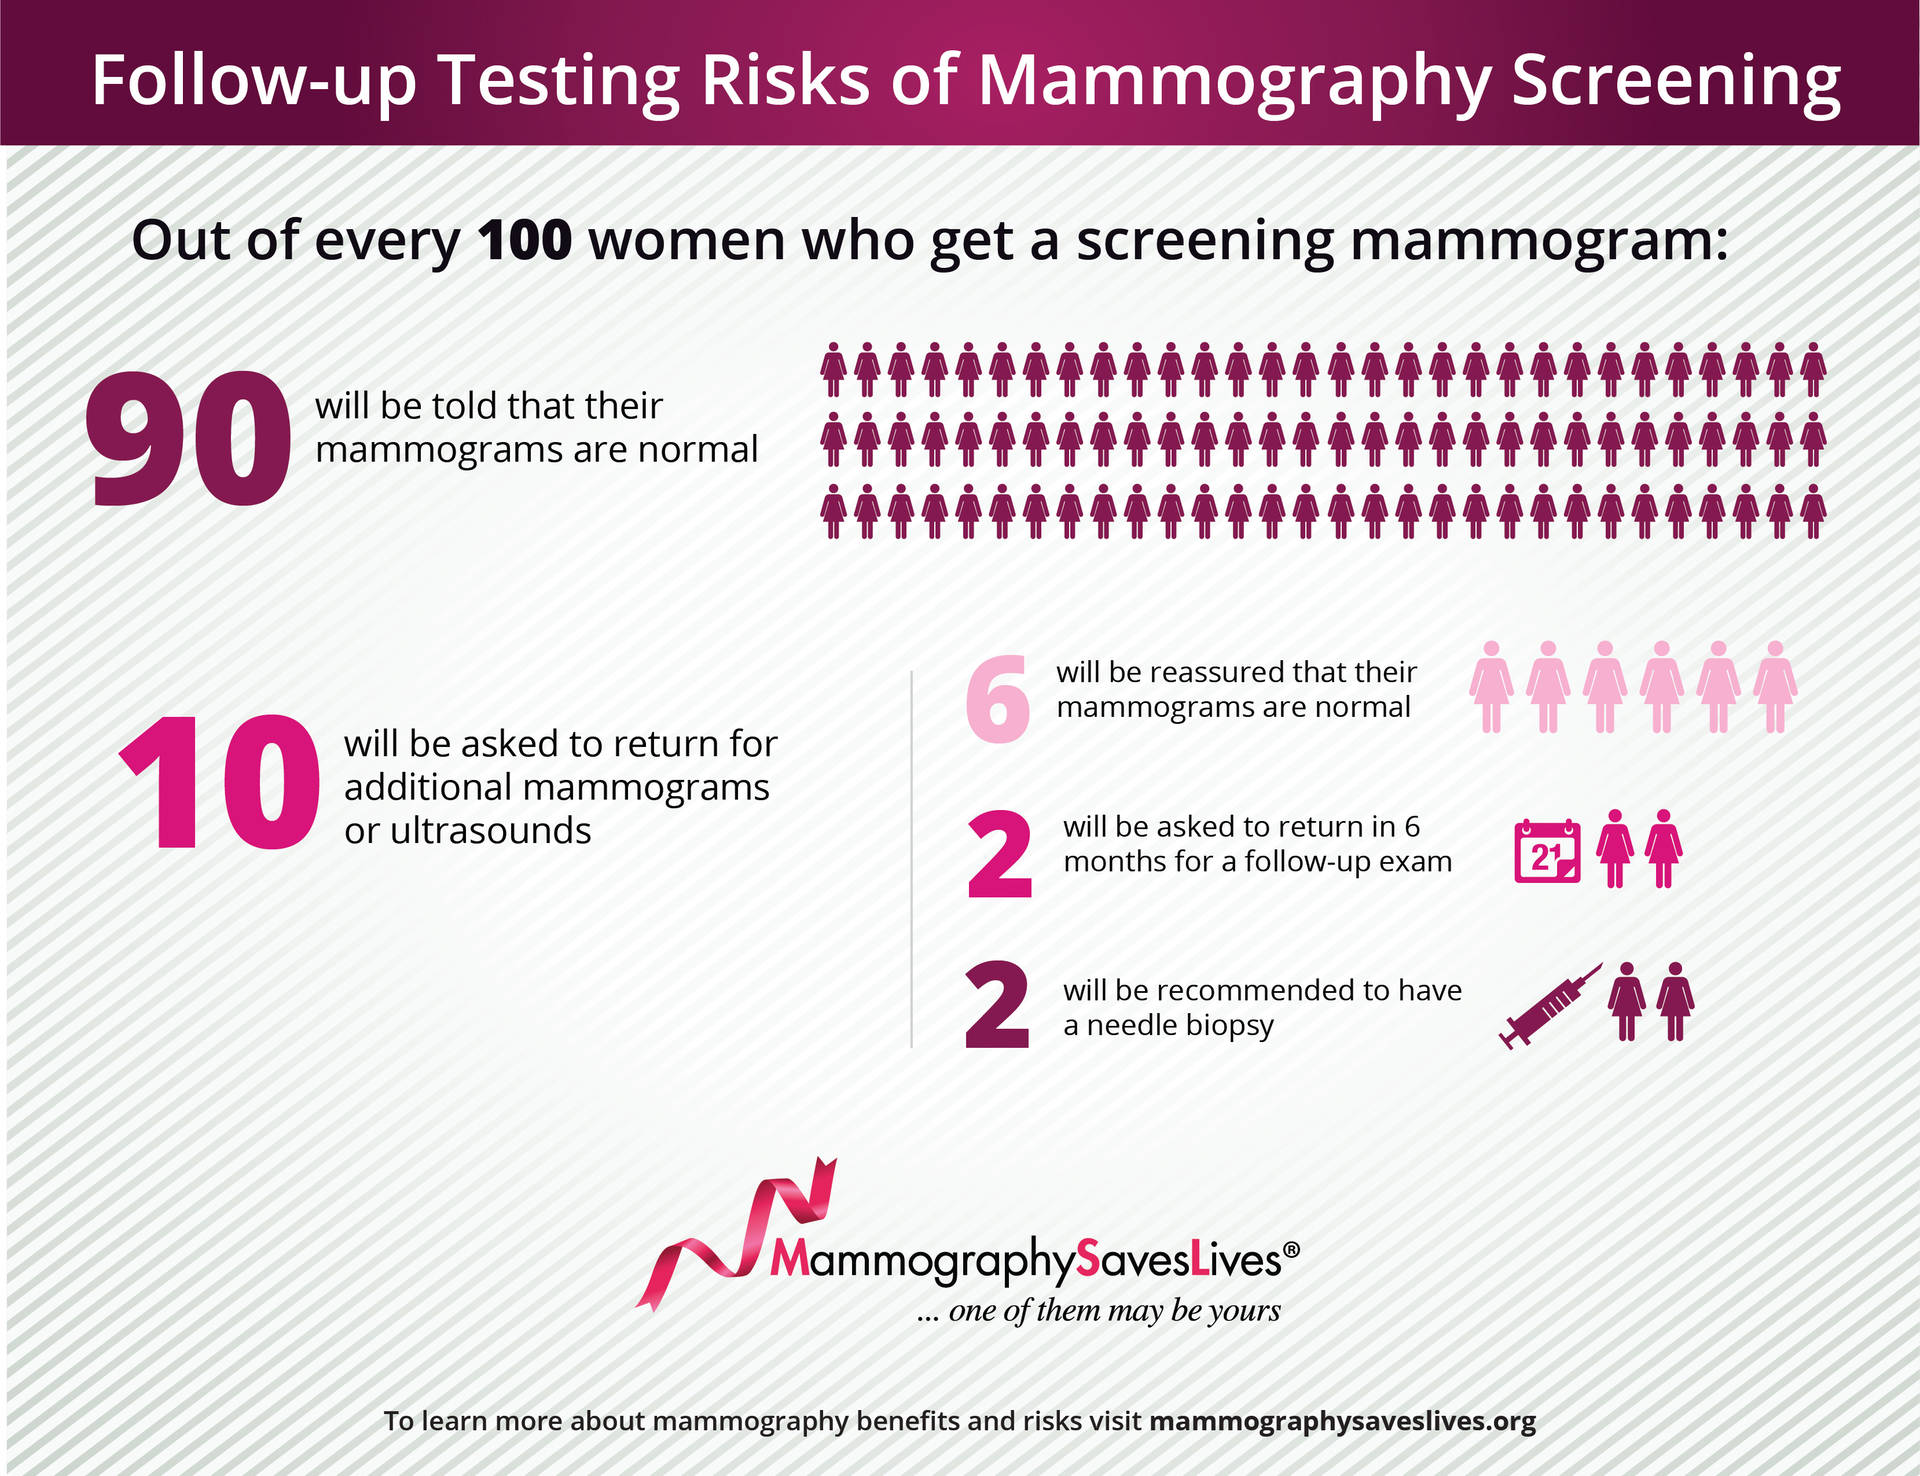 Stage 1 Breast Cancer and Mammogram Detection